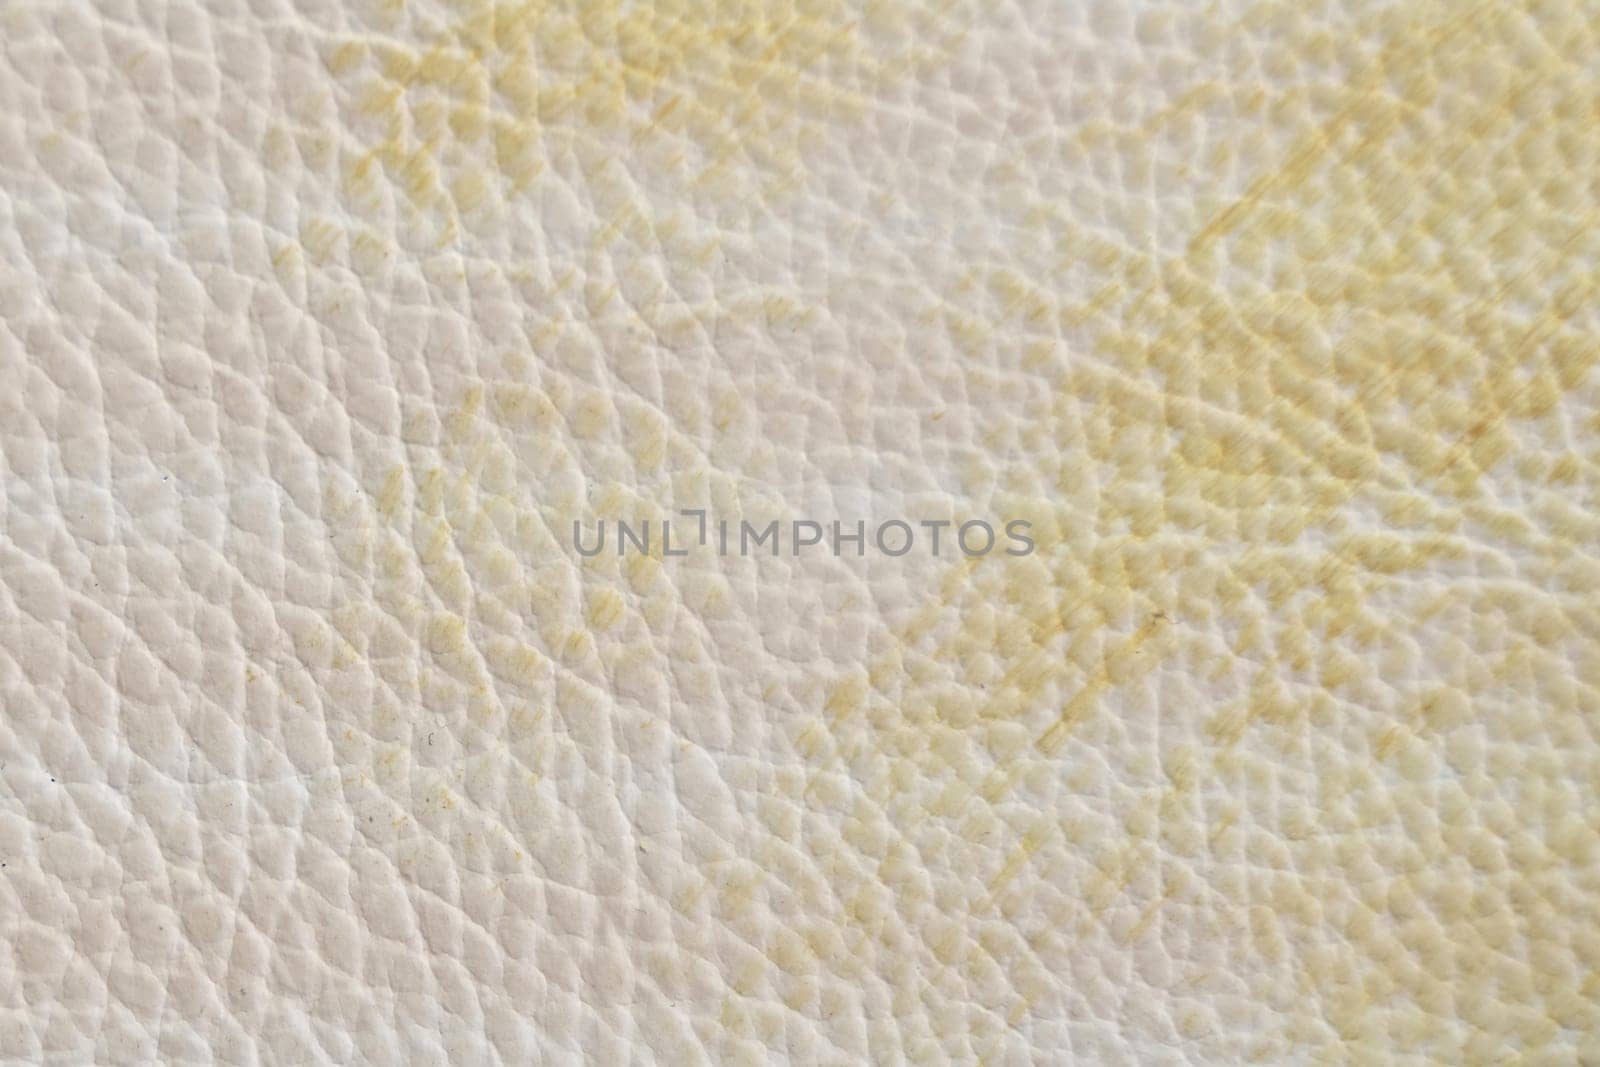 White and yellow leather texture with folds, used as a classic background. Texture and backgrounds